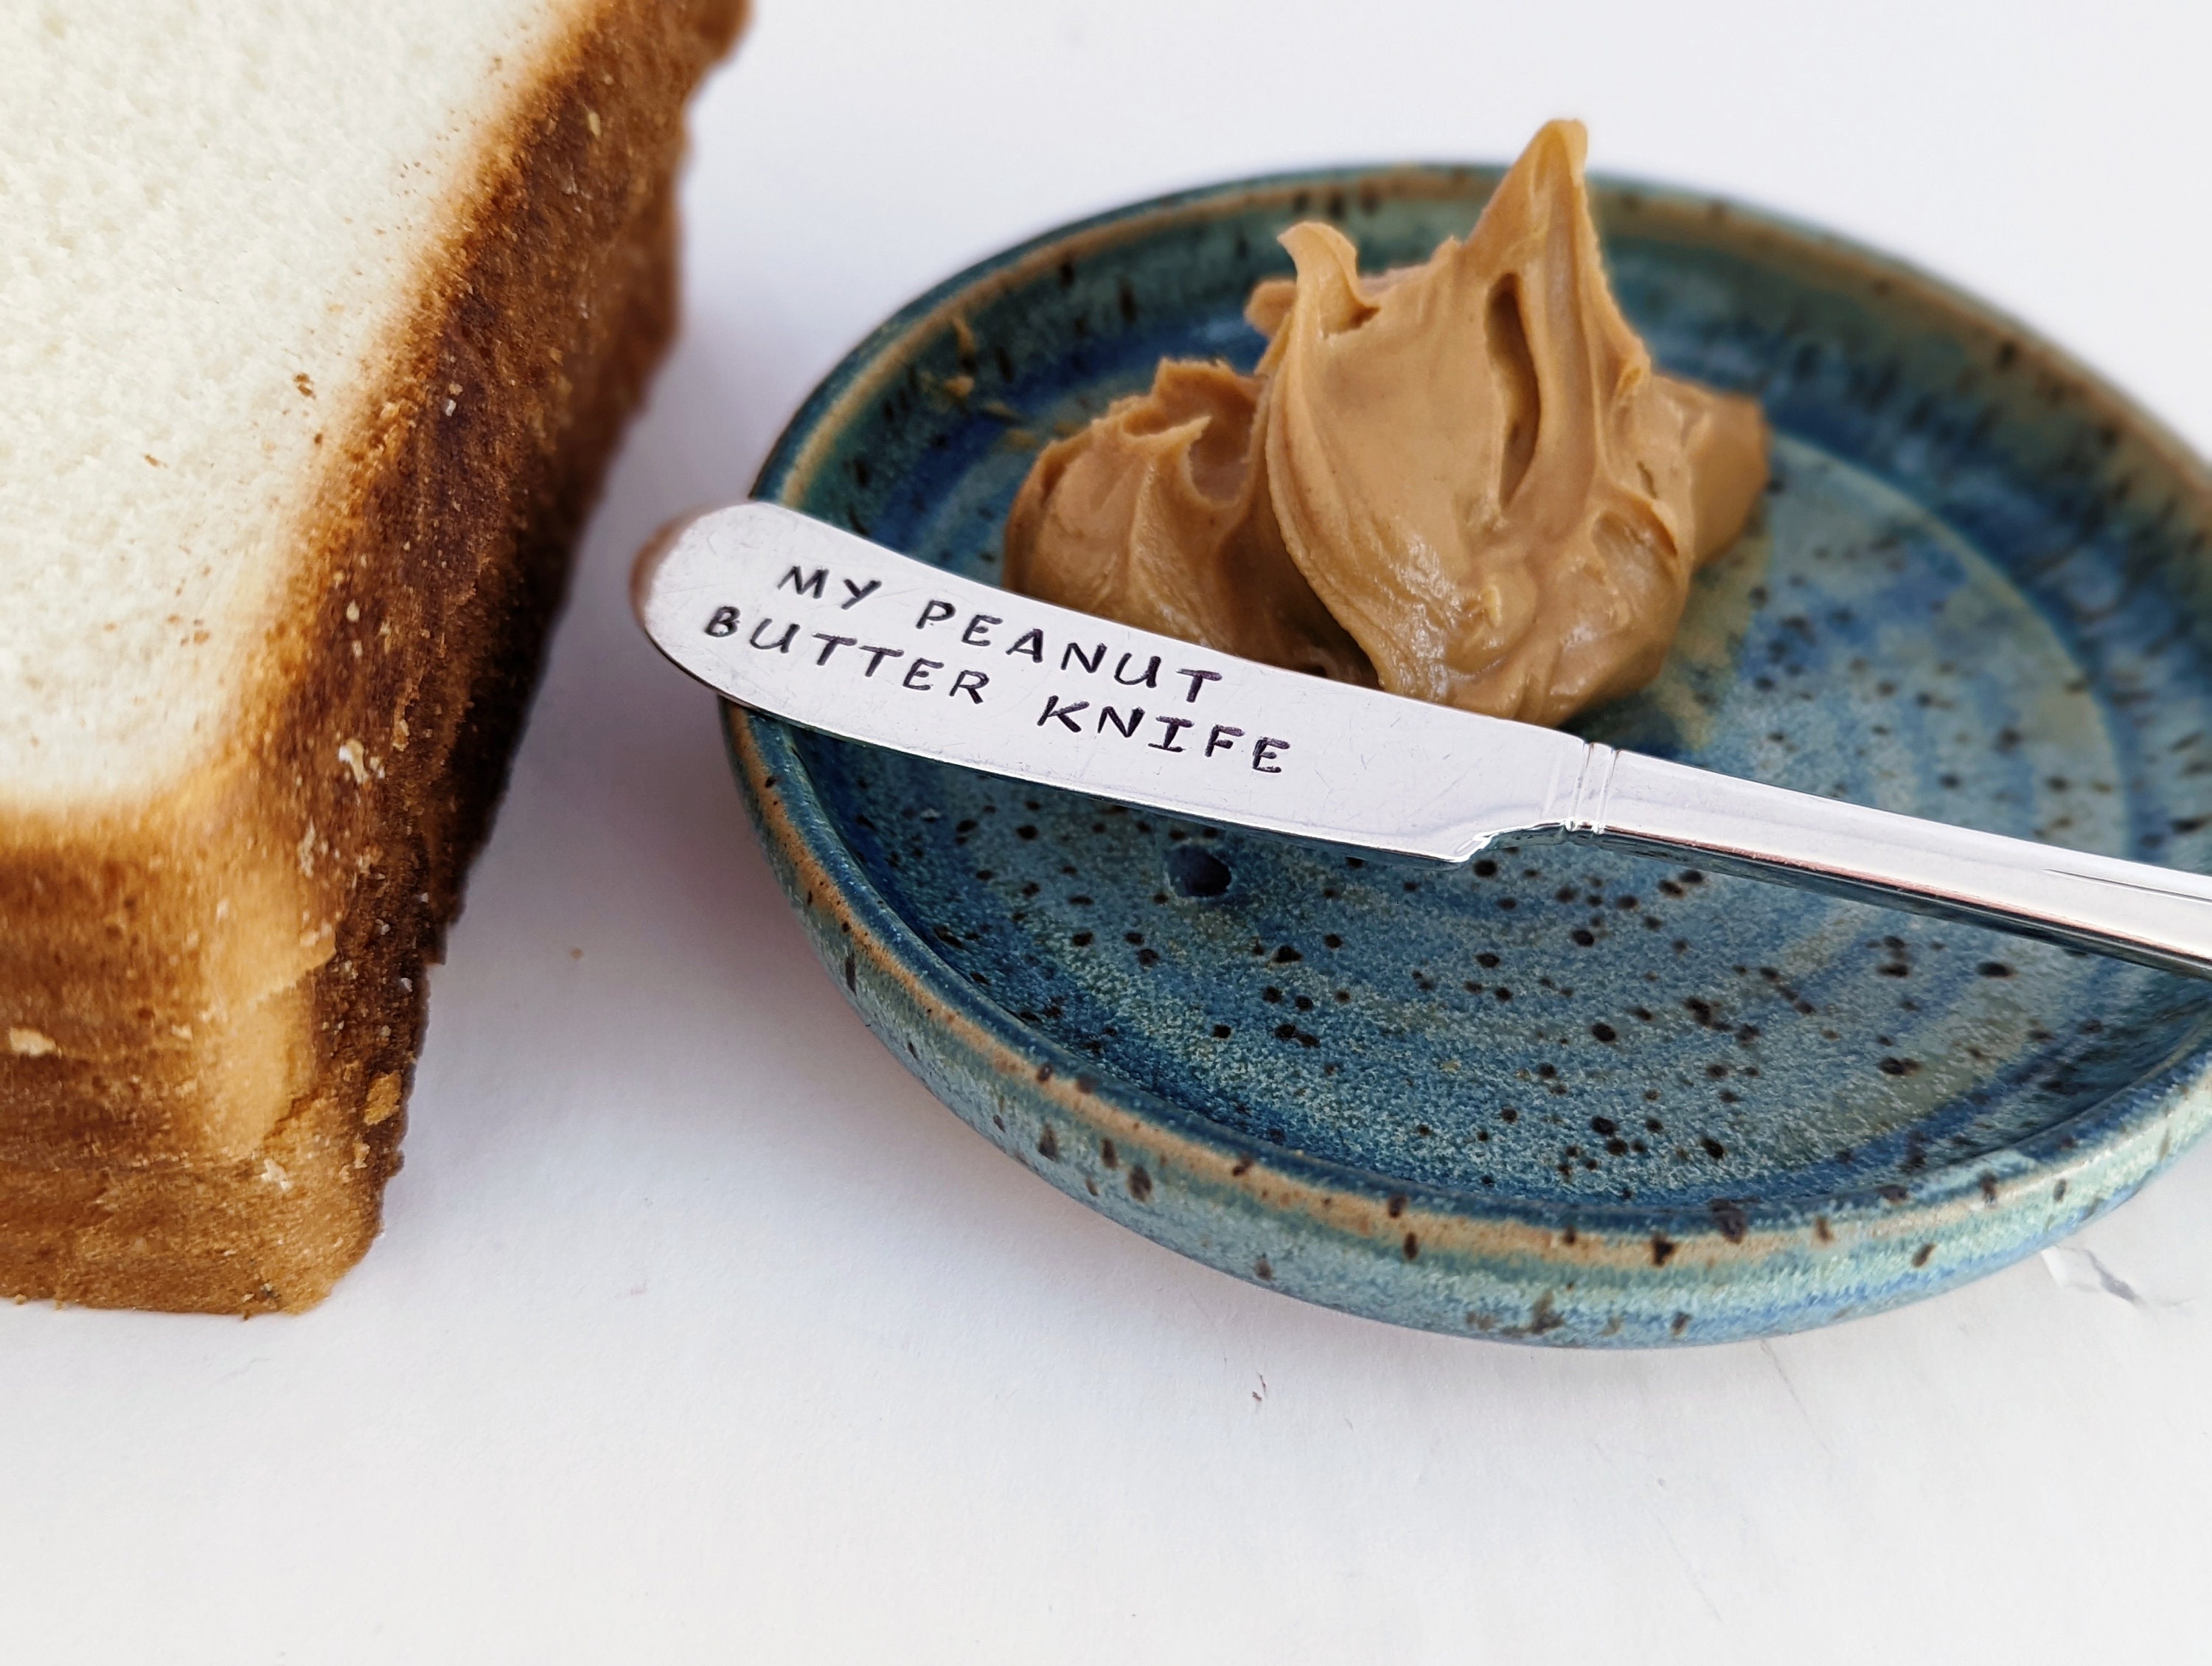 Personalized Peanut Butter Knife Father's Day Gift Almond Butter Gift for  Boyfriend Gift for Brother in Law Gift for Husband 